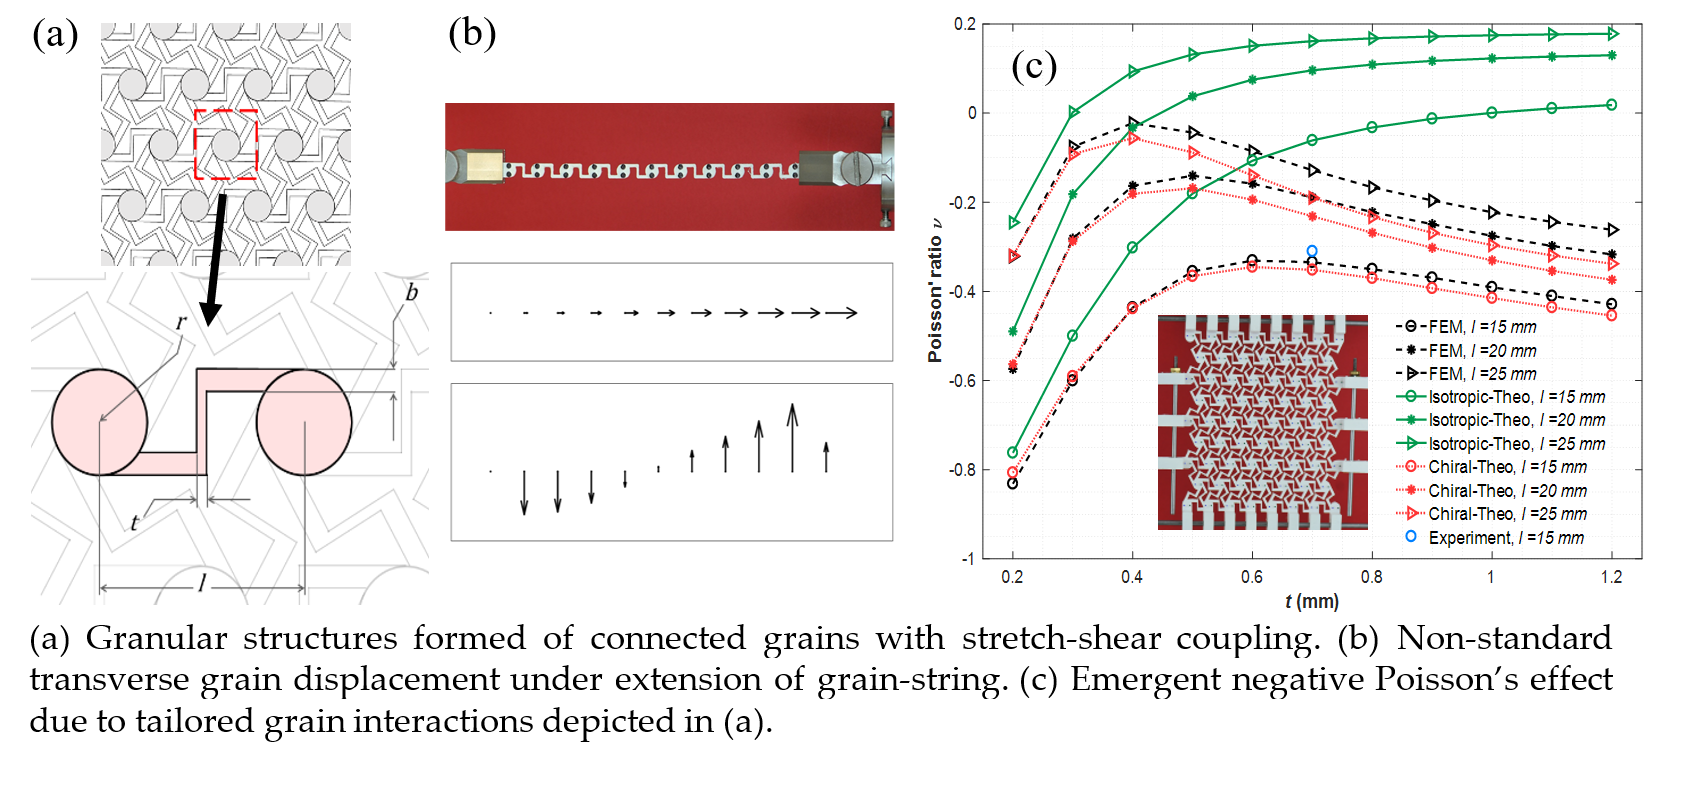 Images of: Granular structures of connected grains with stretch-shear coupling, Non-standard transverse grain displacement under extension of grain-string, and Emergent negative Poisson's effect due to tailored grain interactions